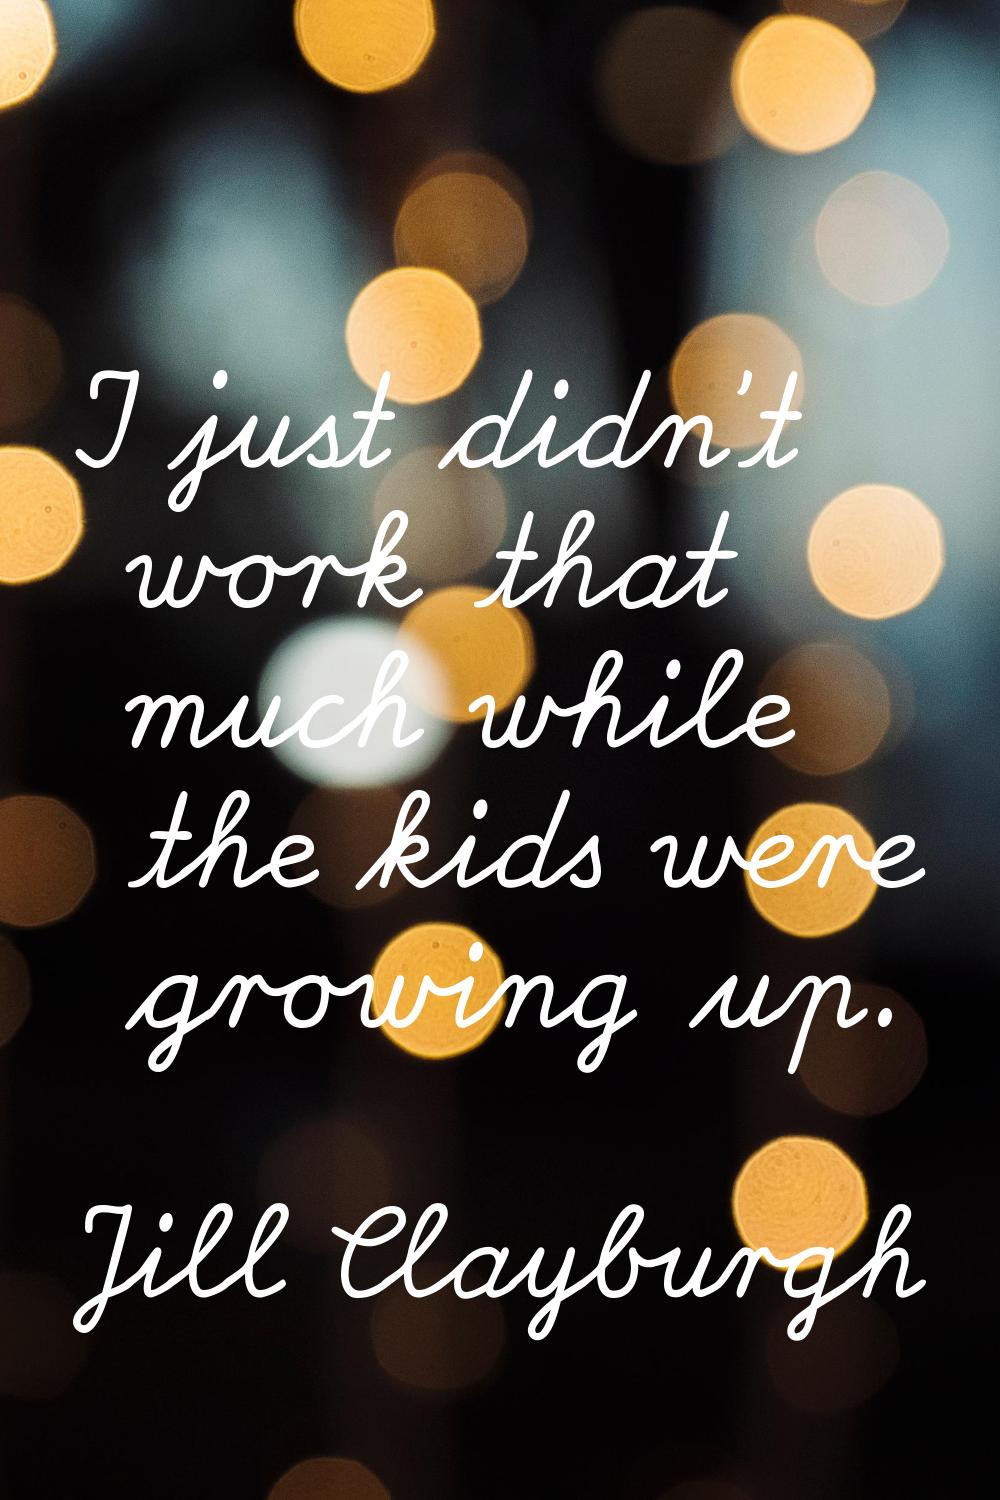 I just didn't work that much while the kids were growing up.